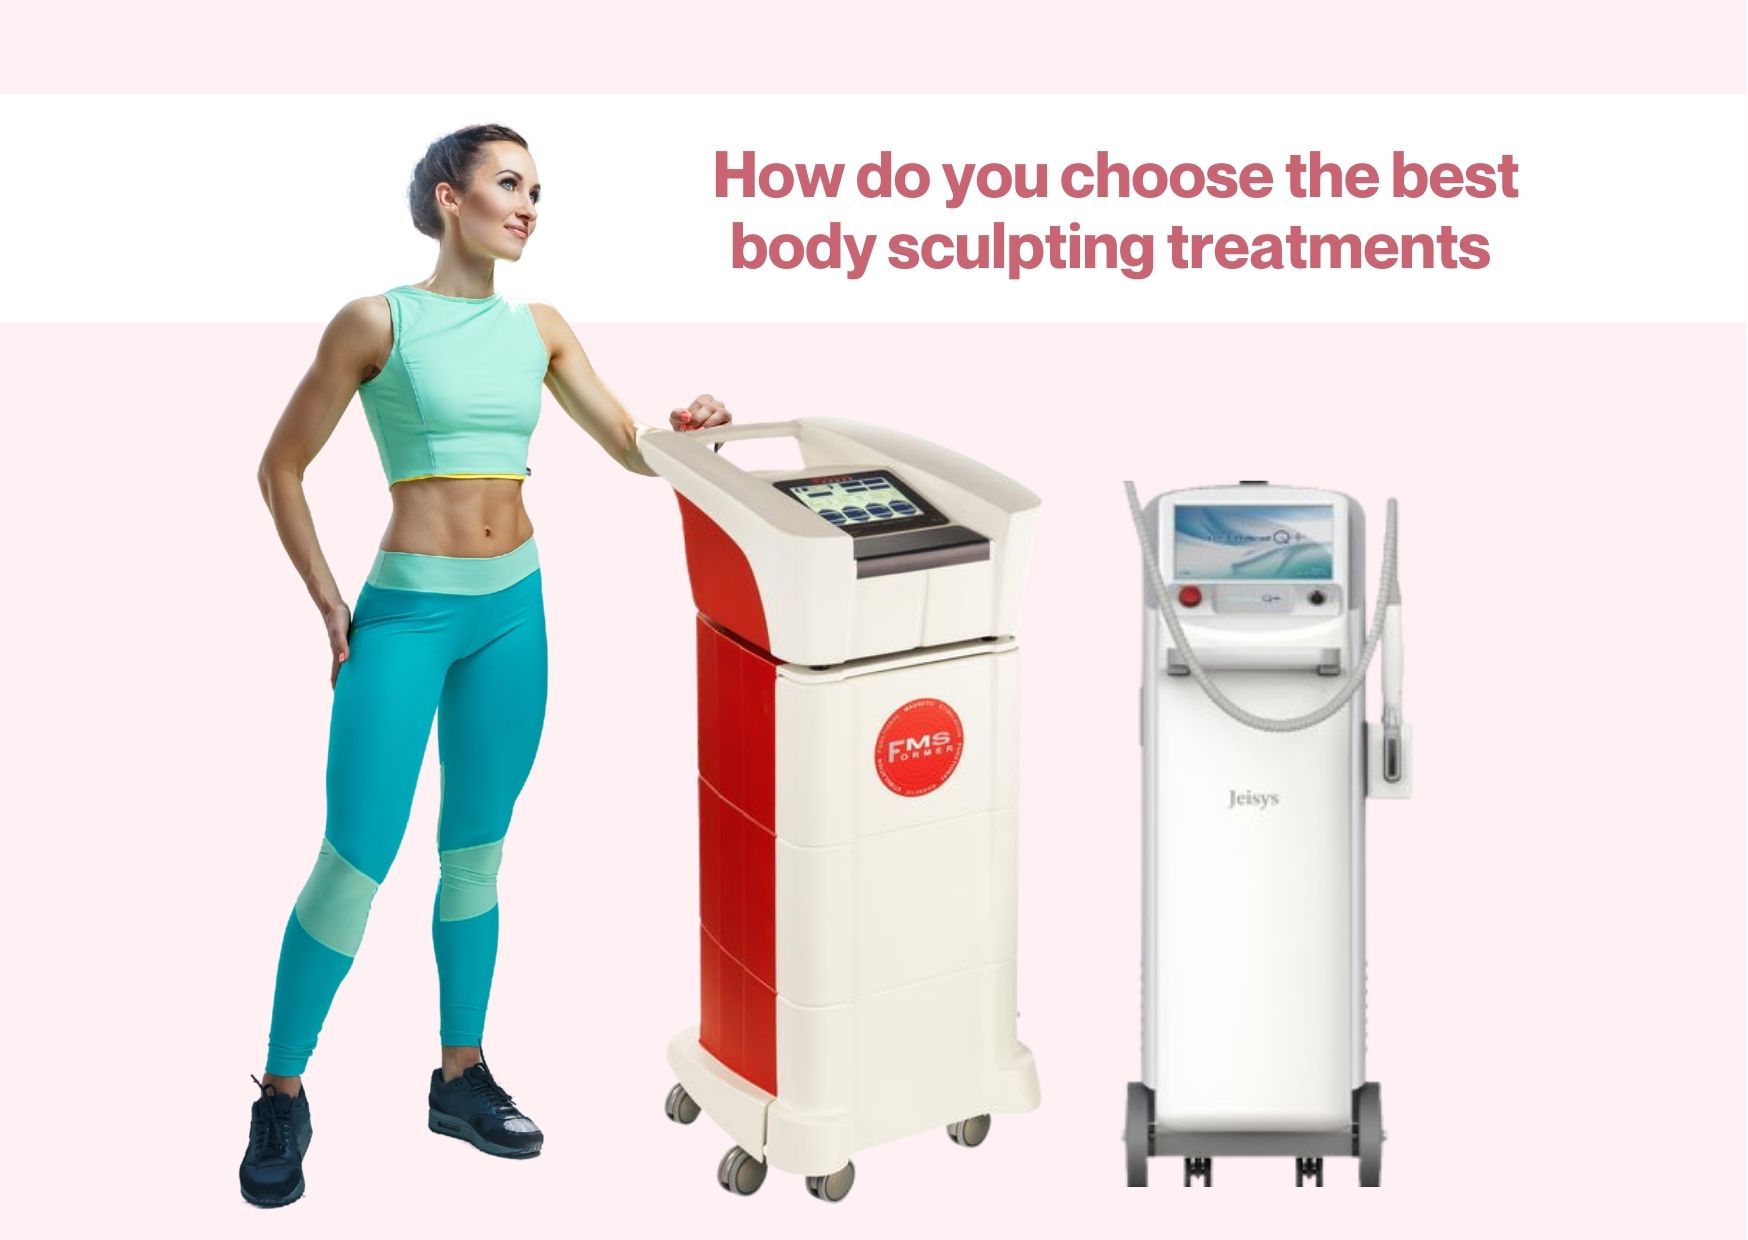 5 Tips on How to Choose the Best Body Sculpting Treatments